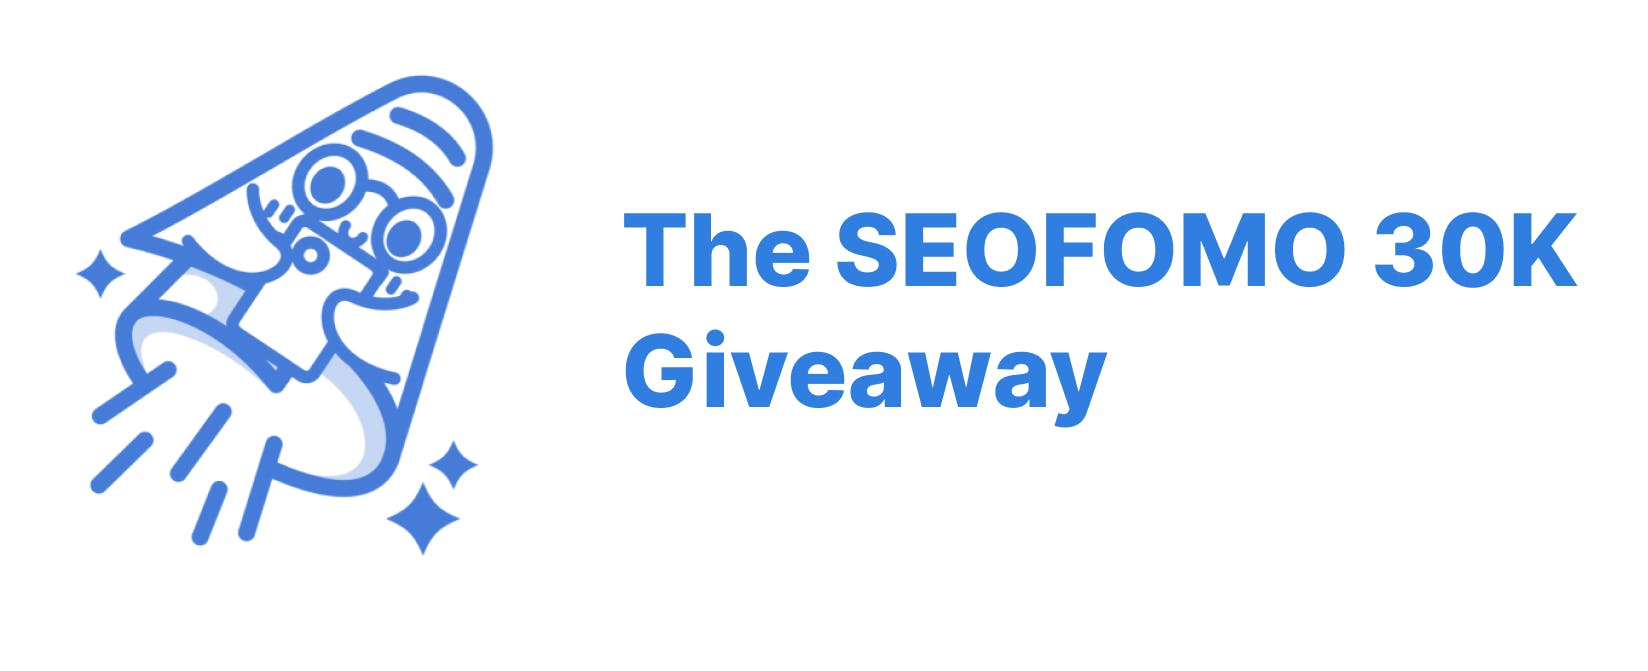 Participate in the SEOFOMO 30K Giveaway and Win Free Access to 15 SEO Tools & Resources